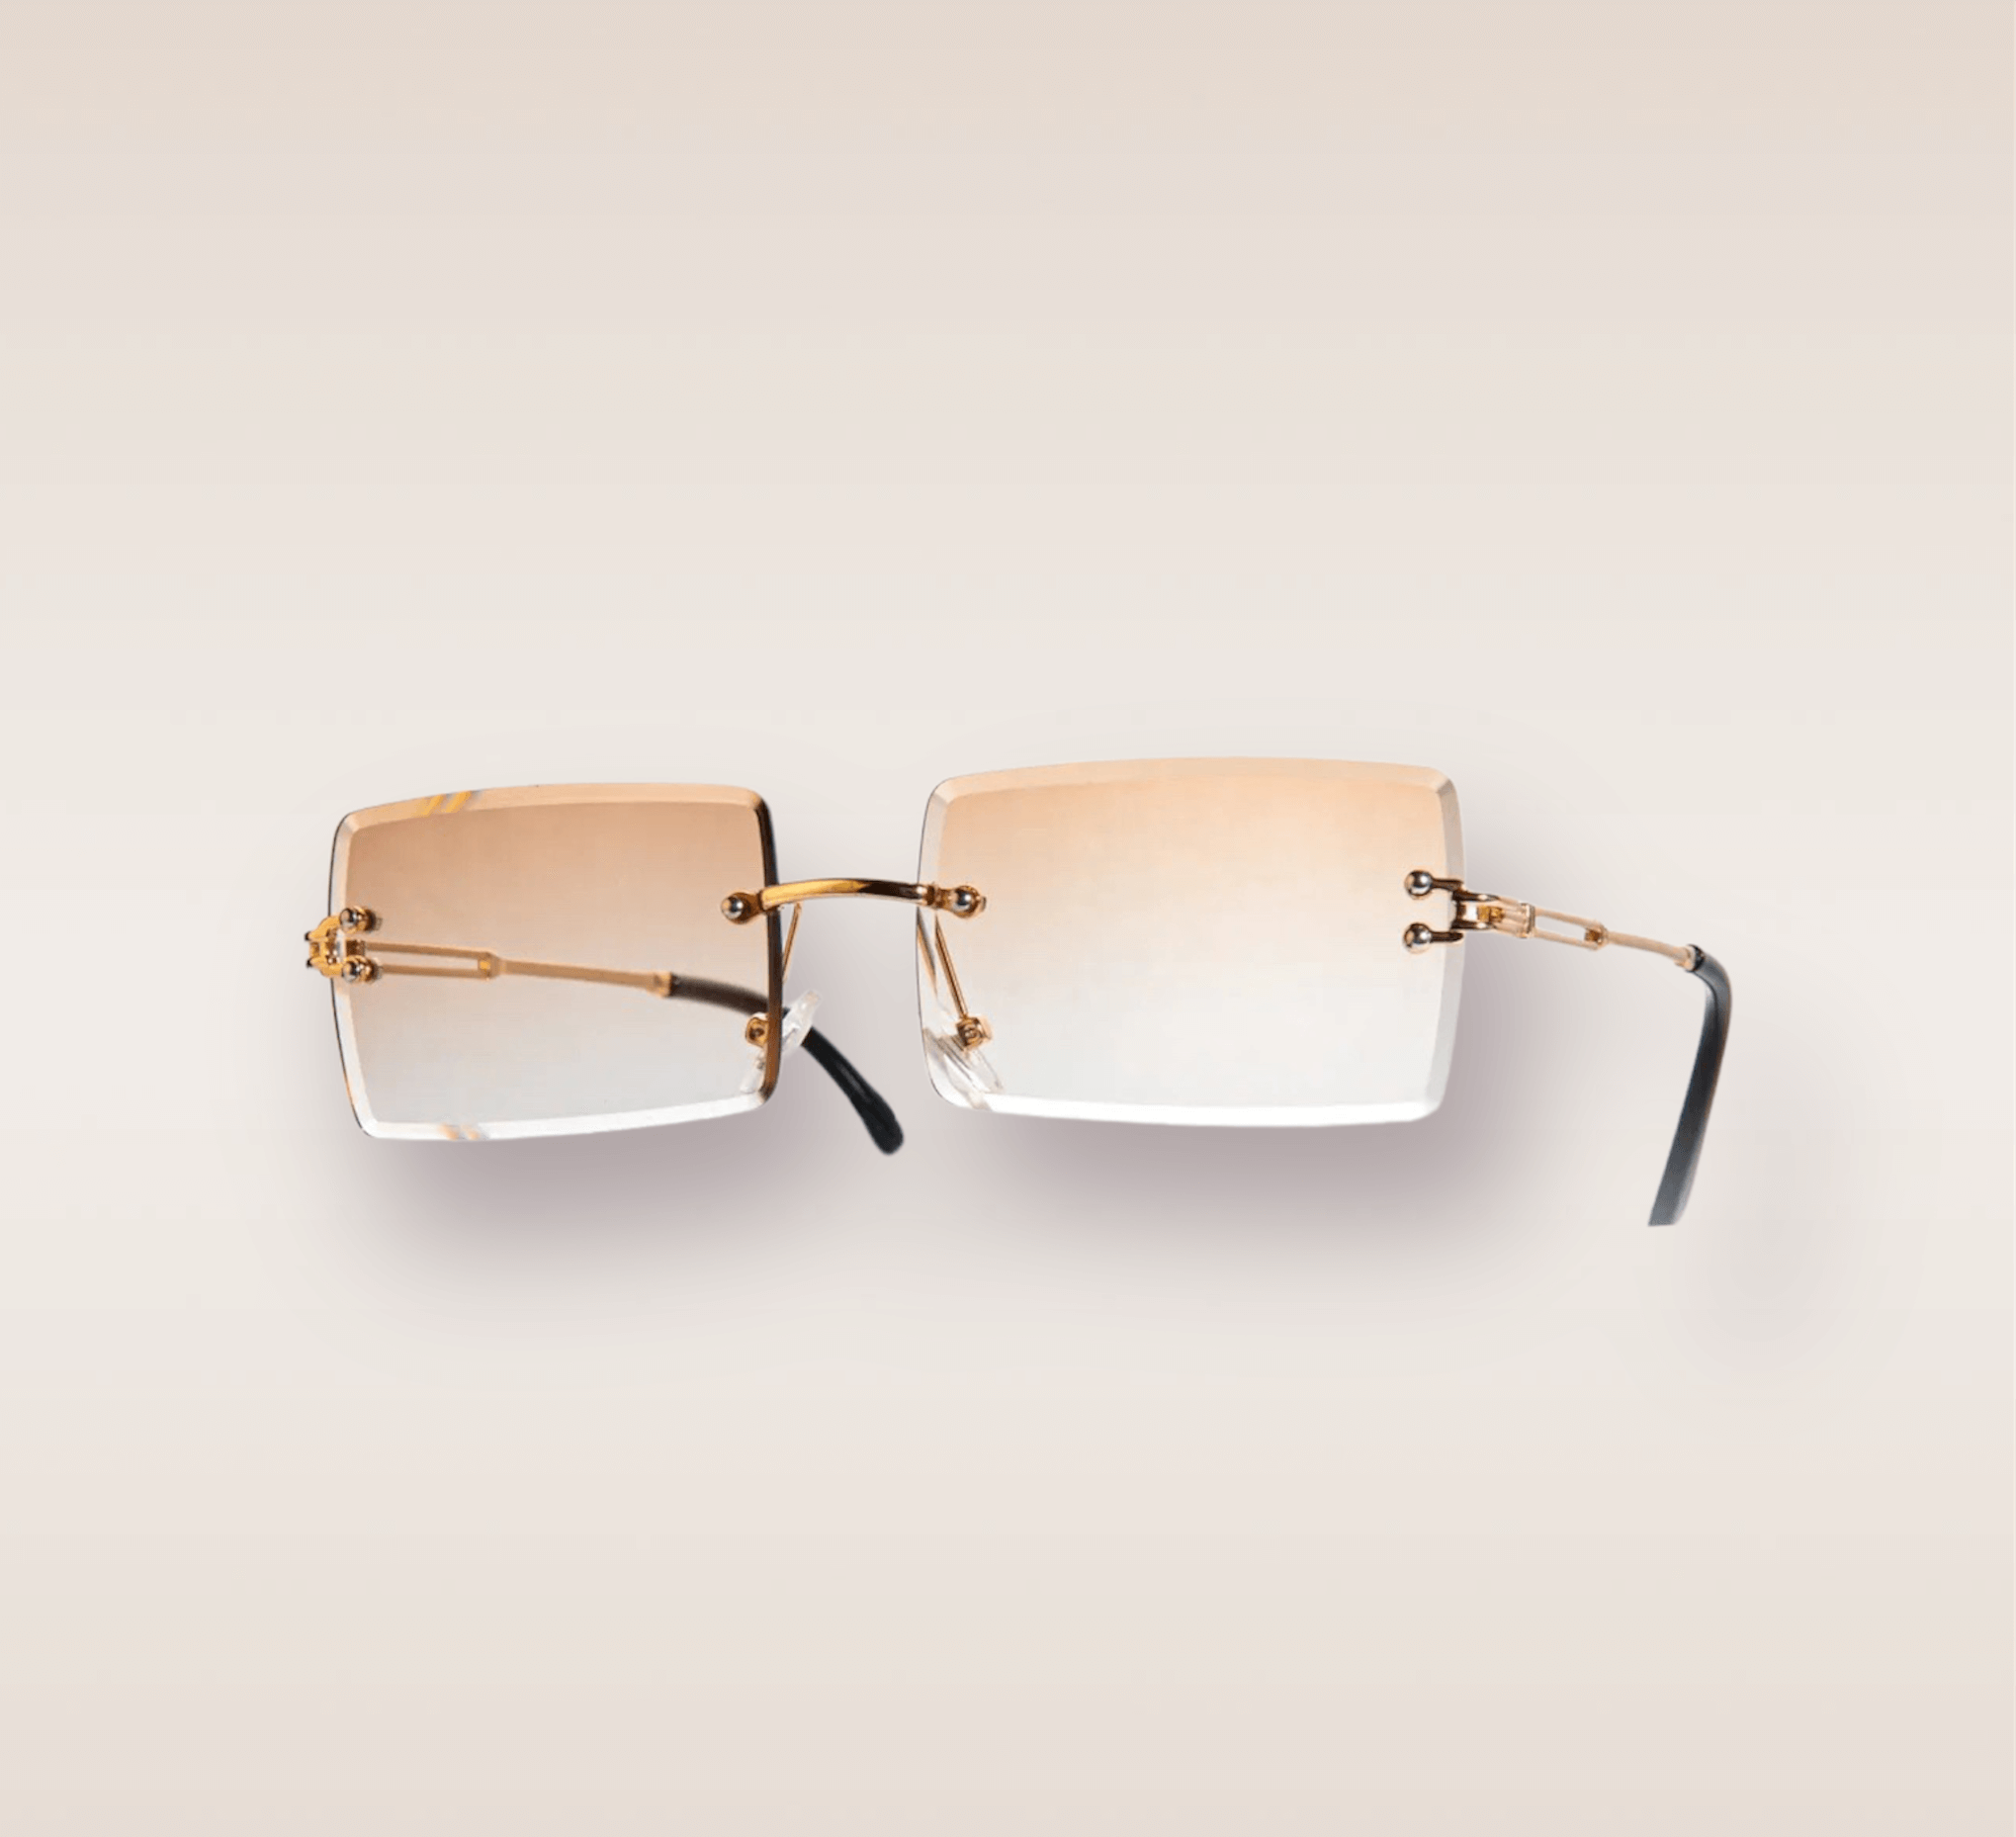 In this up-close shot, we are introduced to the captivating Gradient Tea frames, a stylish and sophisticated eyewear option. The rimless frames feature a mesmerizing light brown gradient hue. The gold arms add a touch of opulence and refinement, complimenting the brown tones with a warm metallic accent. These frames are a true fashion statement, combining modern design with a touch of luxury. 